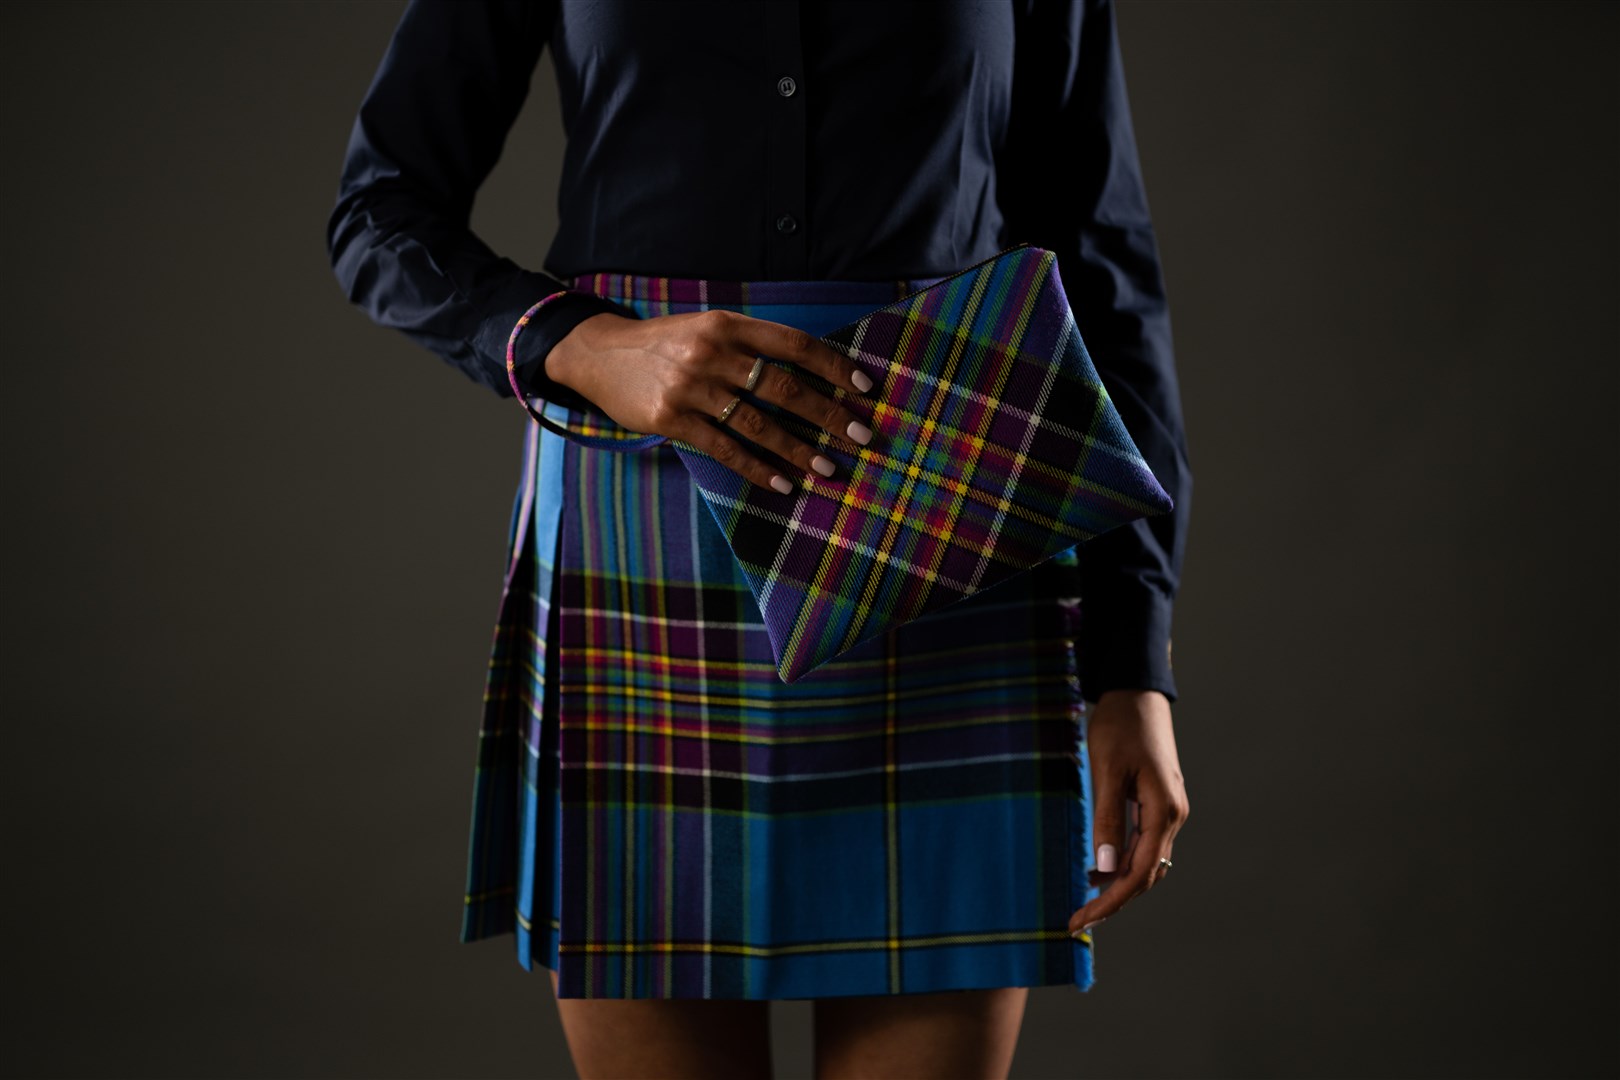 Women's outfit. Picture: MBP Ltd for Team Scotland